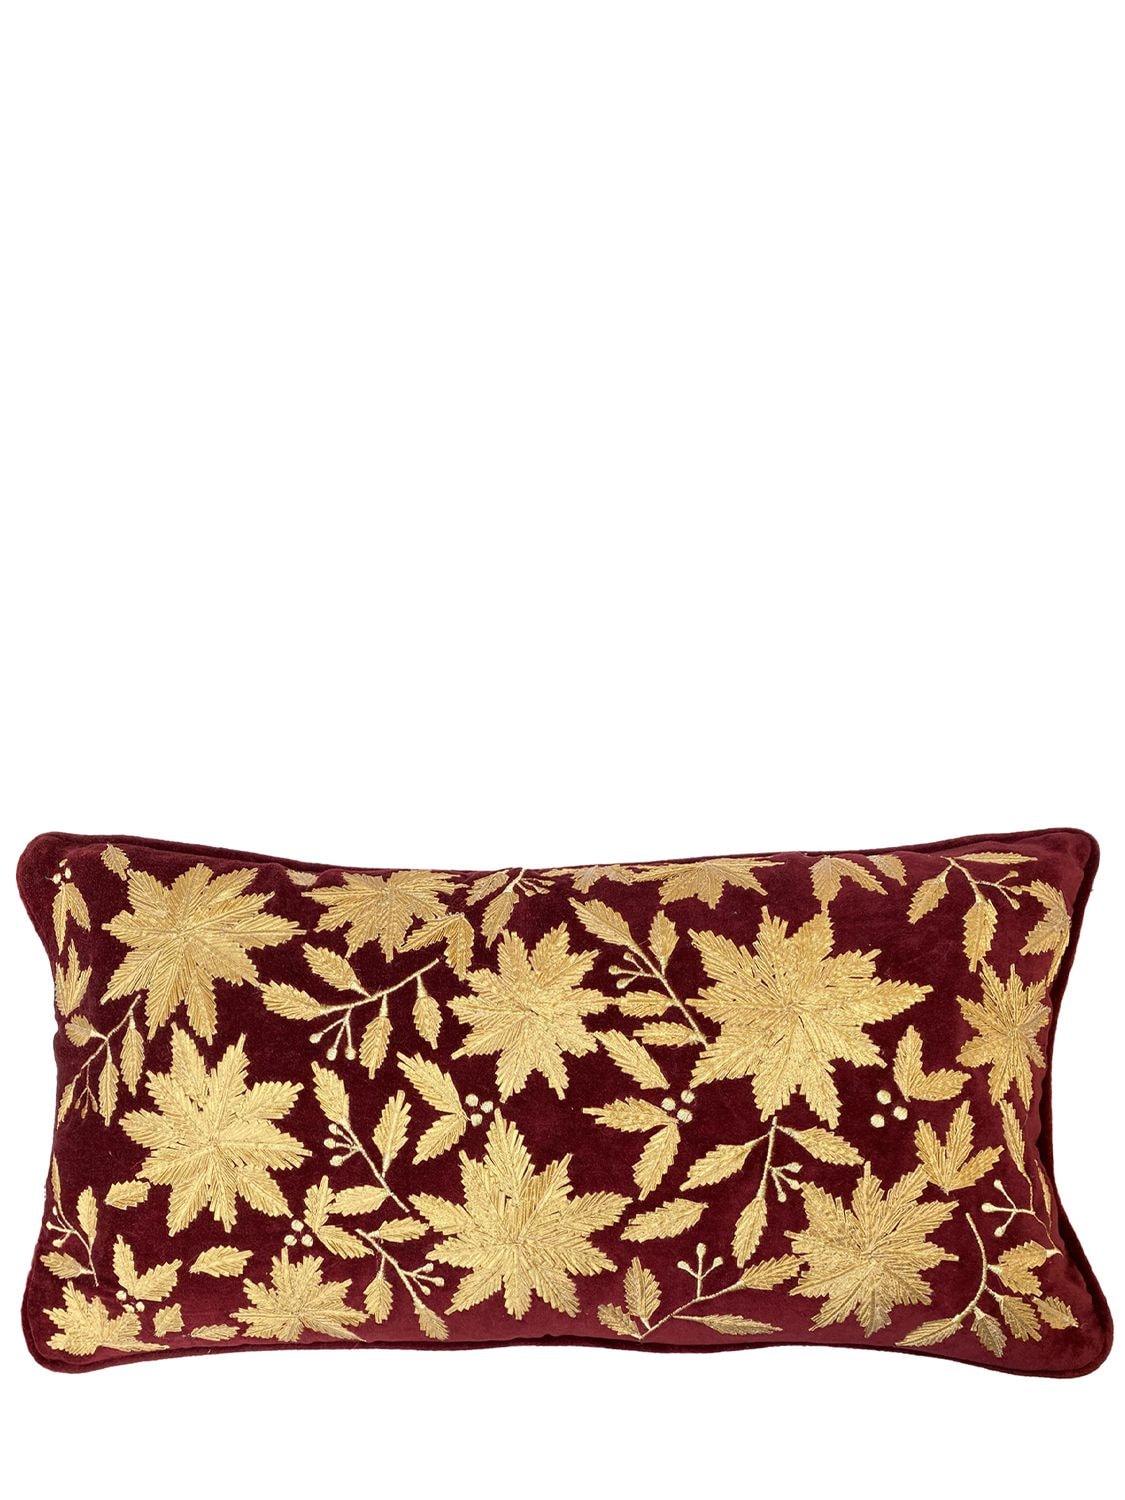 Les Ottomans Embroidered Velvet Cushion In Red,gold